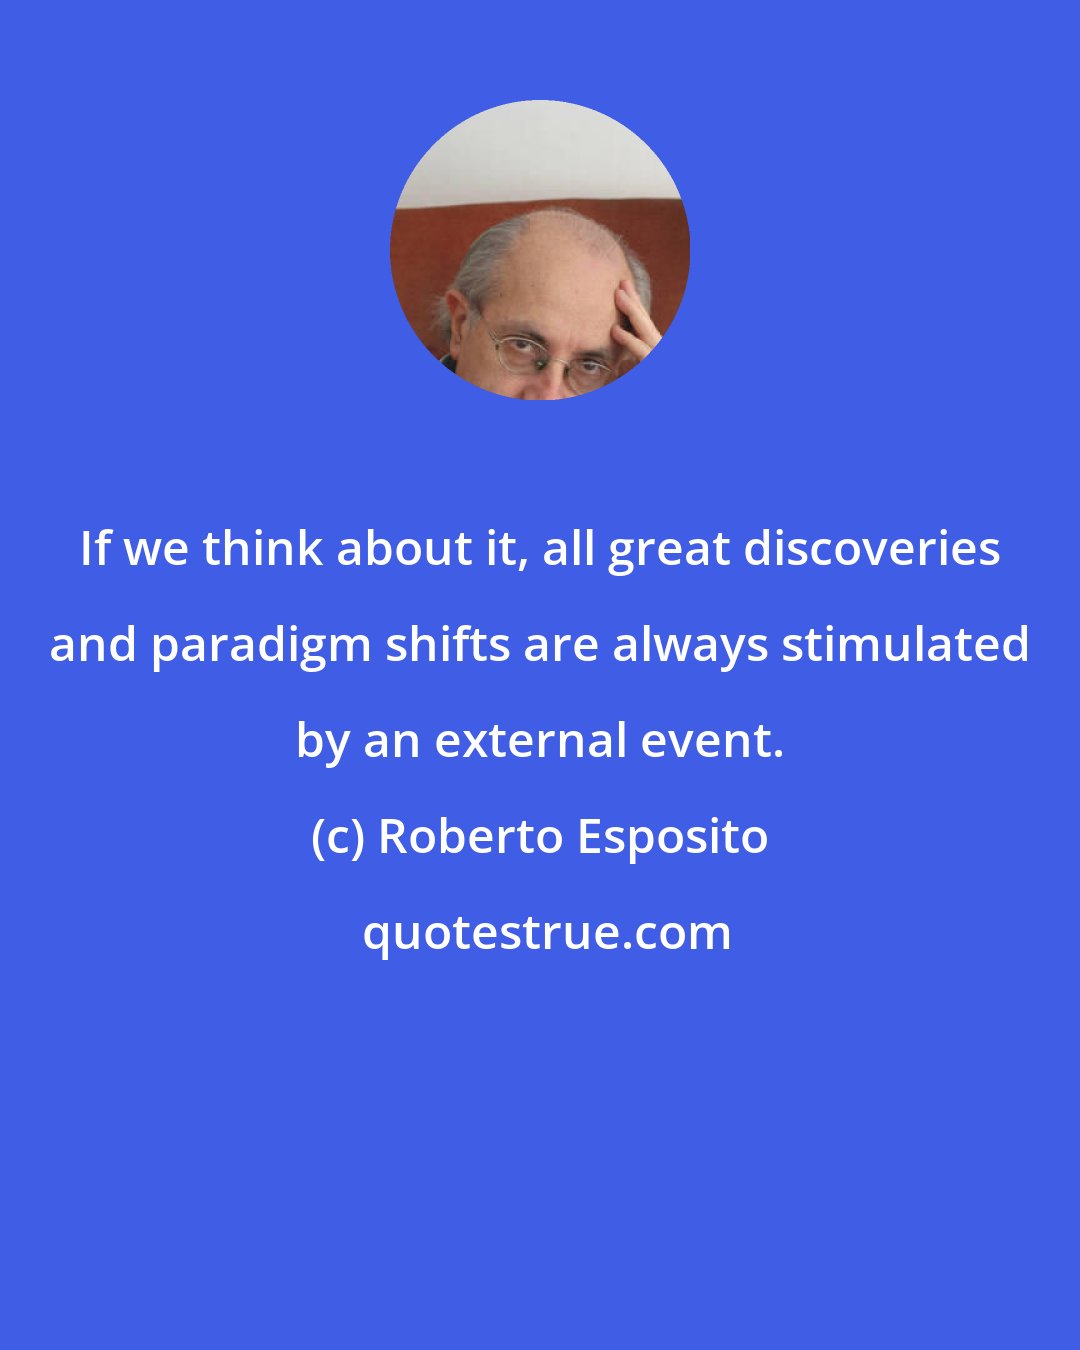 Roberto Esposito: If we think about it, all great discoveries and paradigm shifts are always stimulated by an external event.